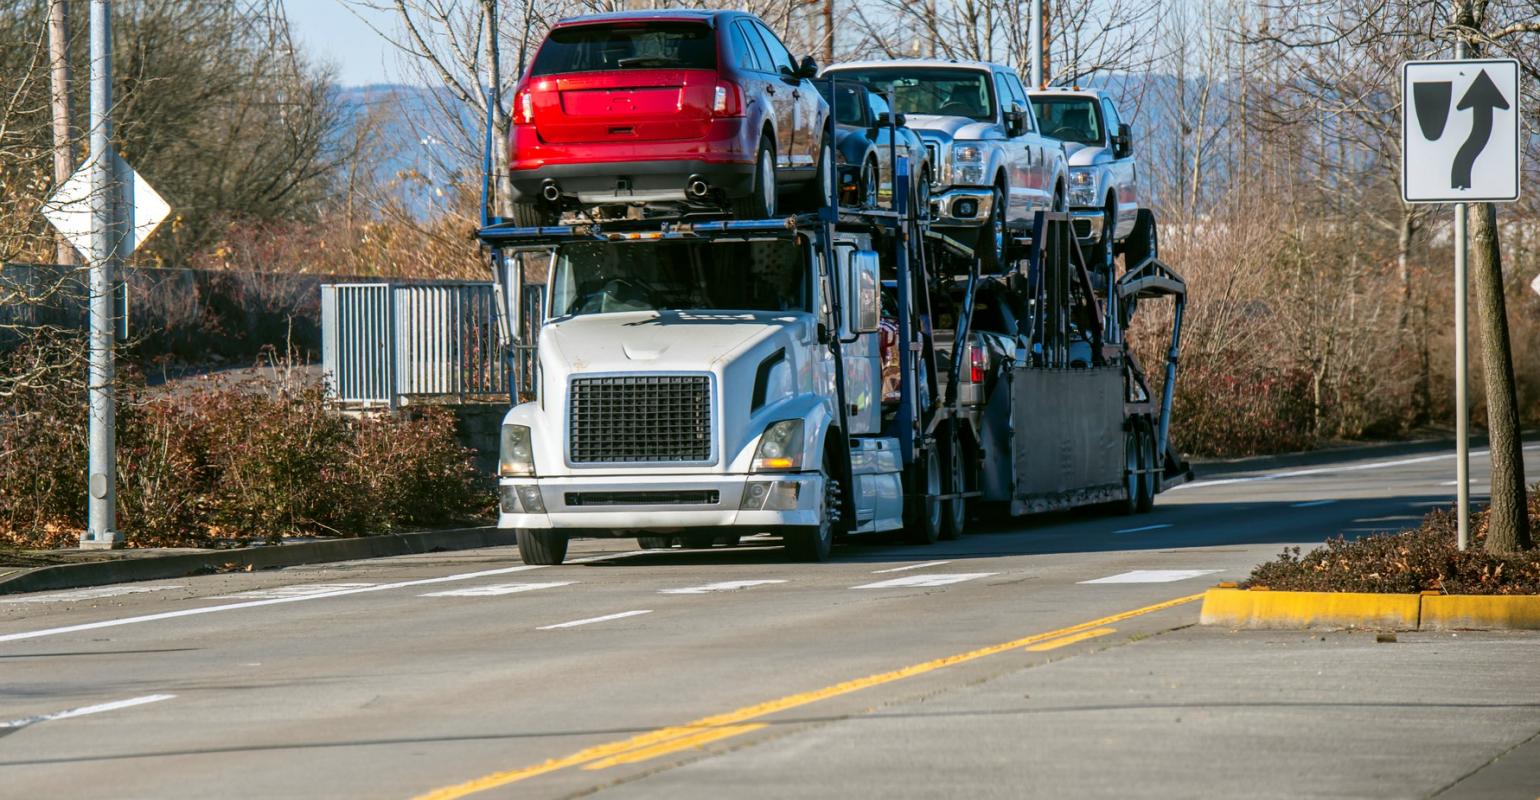 Reliable Auto Haulers Key to On-Time Vehicle Deliveries